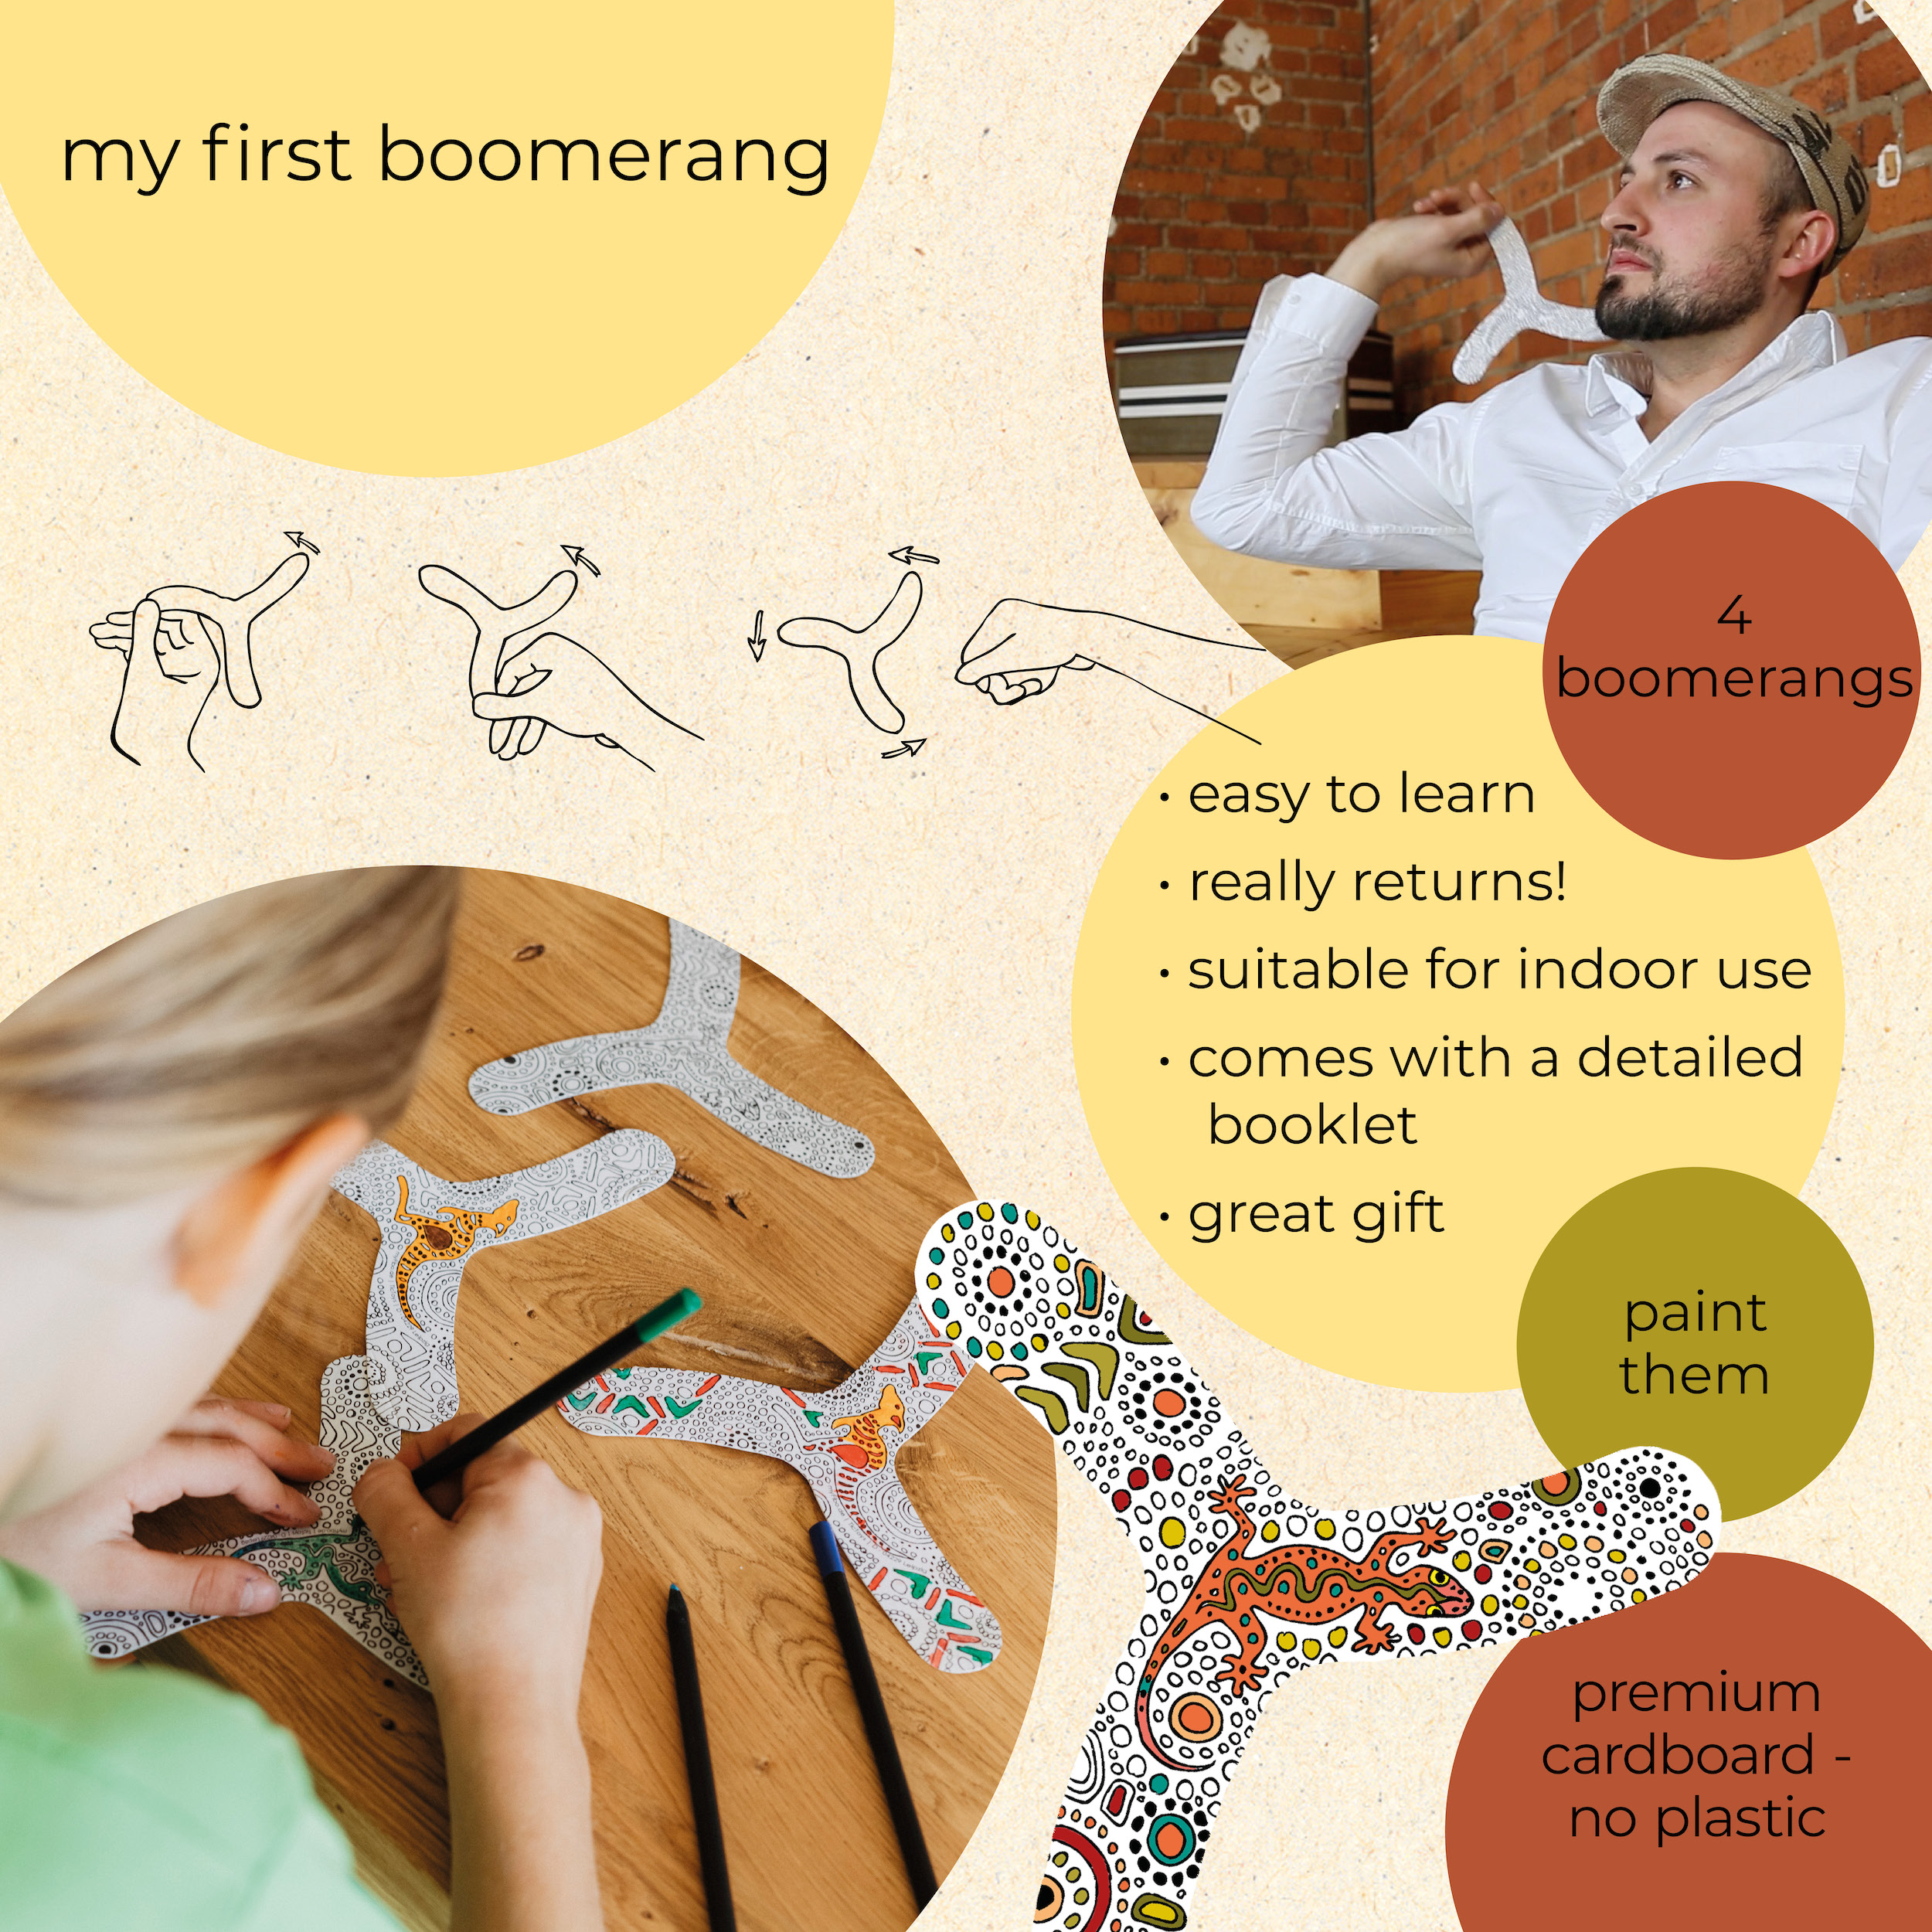 In addition to the indoor boomerangs, myFibo contains information on the history and physics of the boomerang